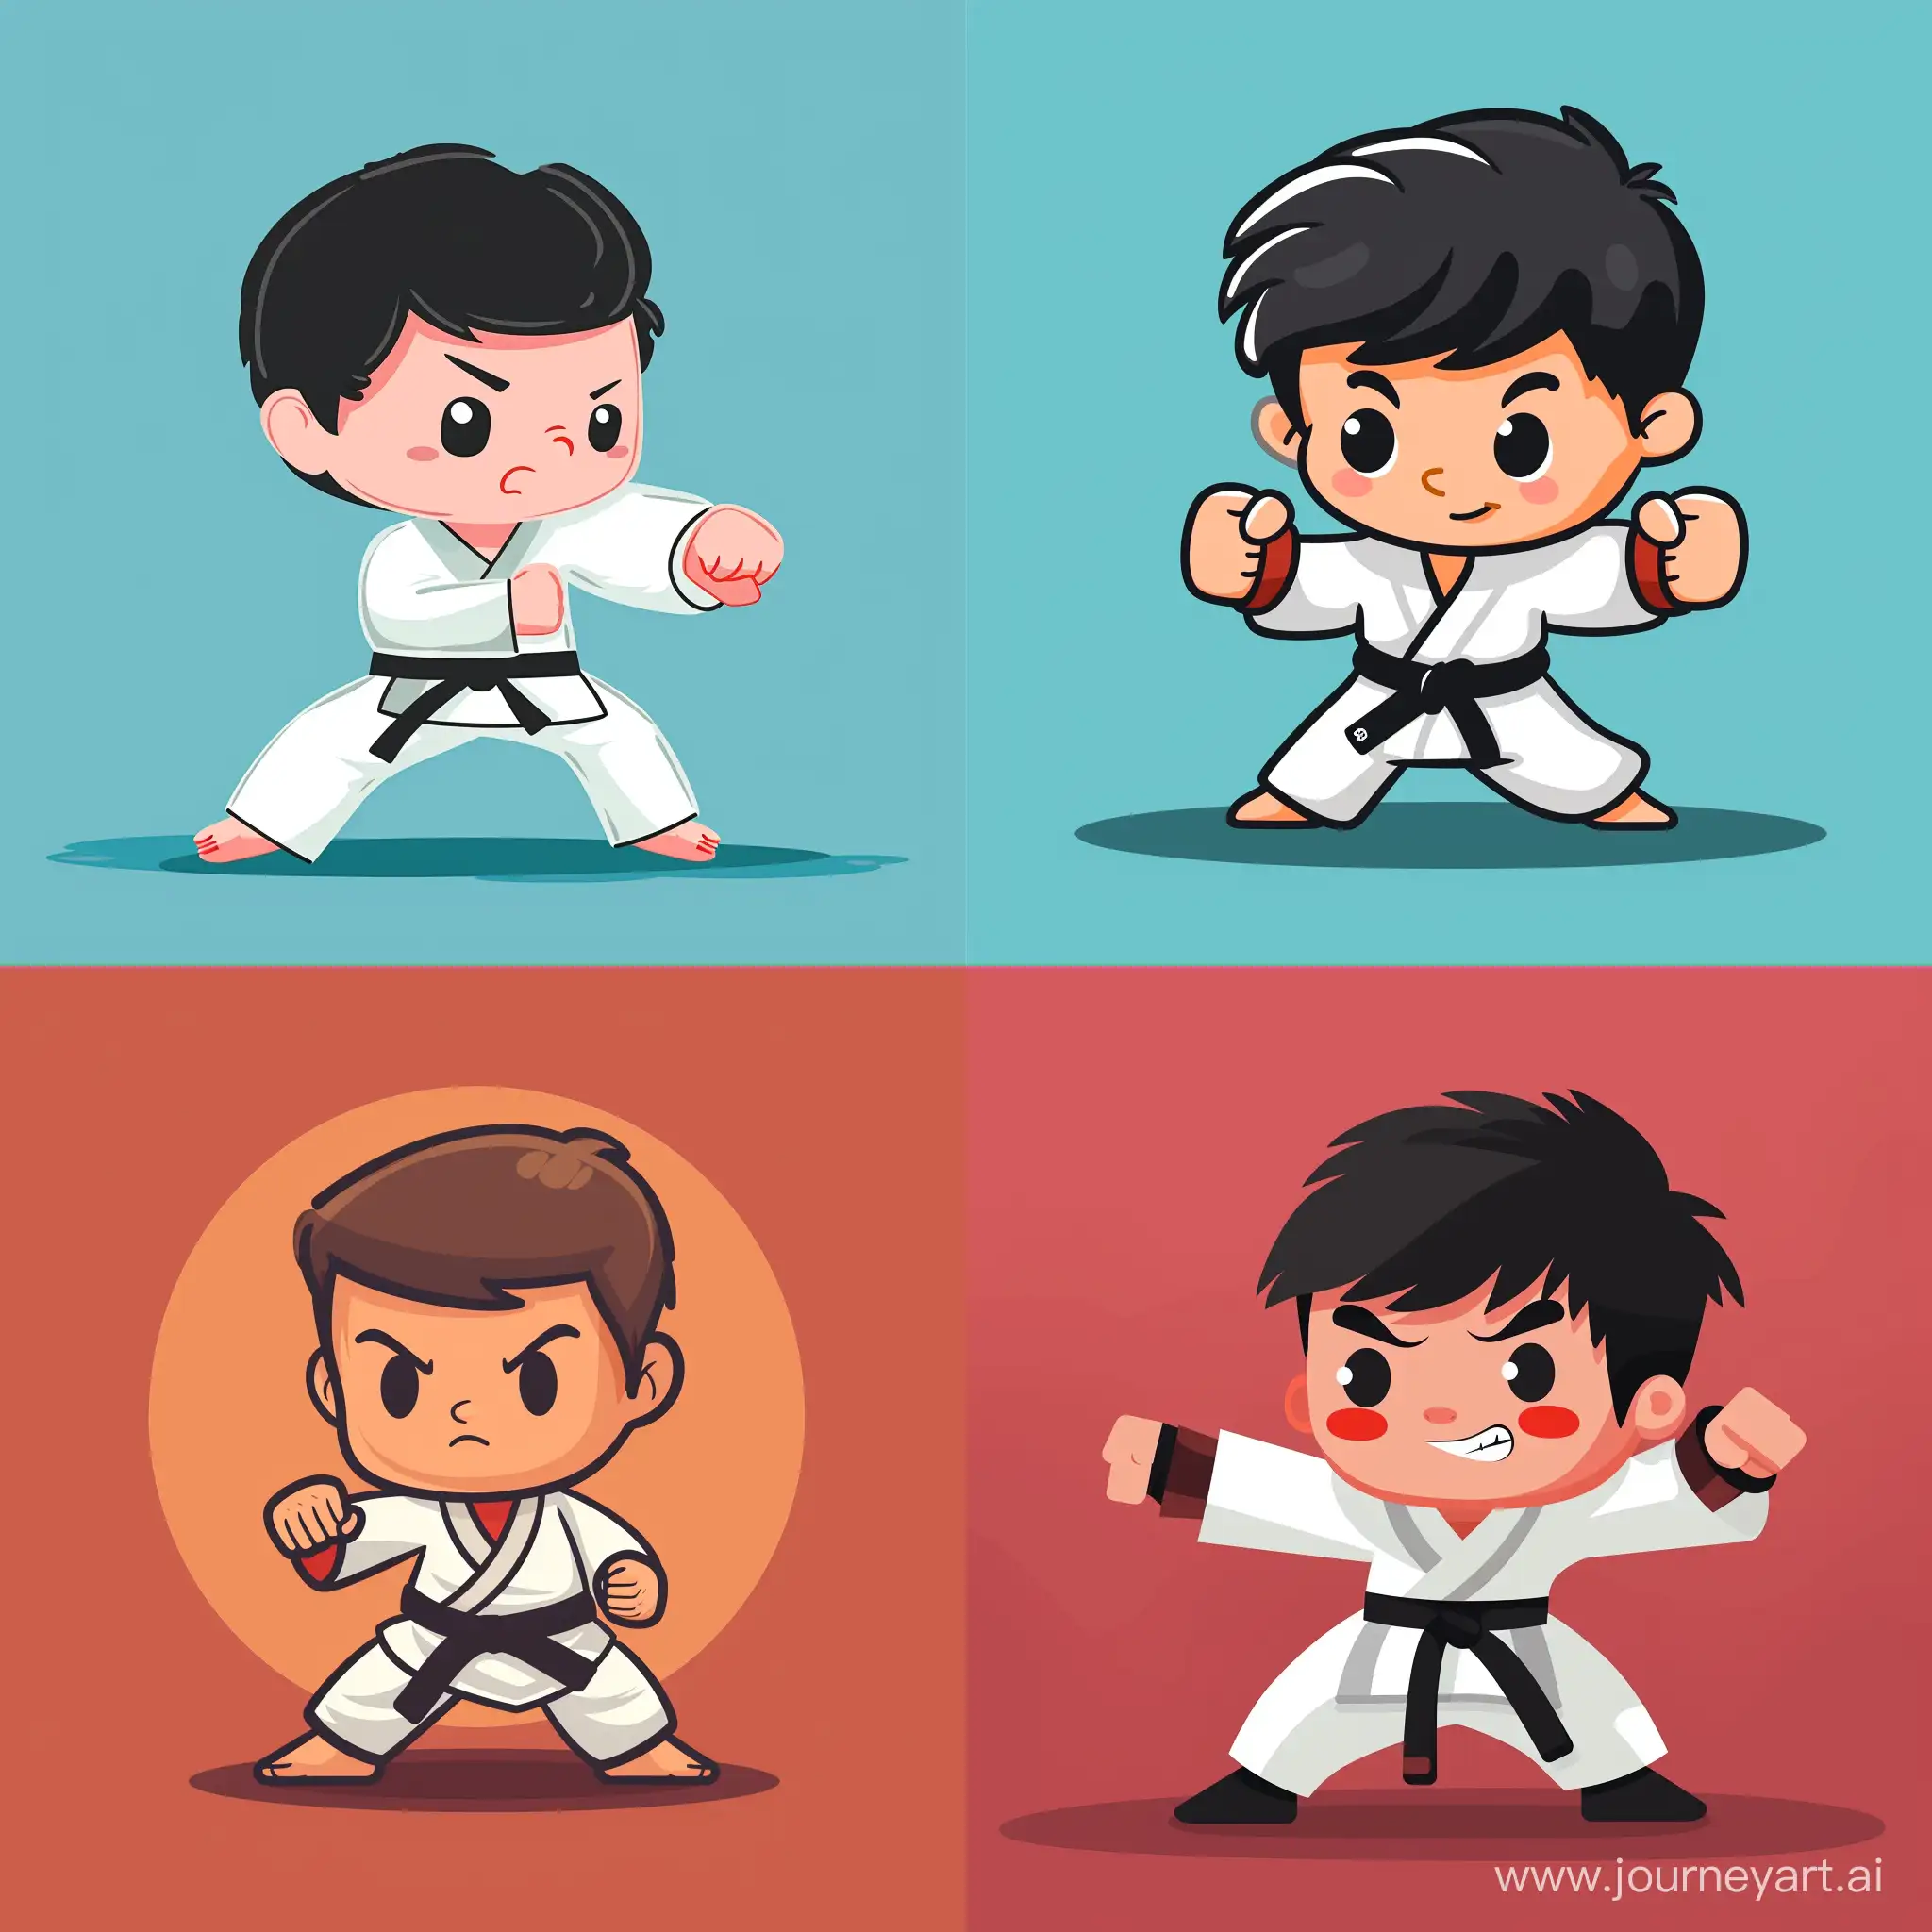 the character of cartoon karate boy, in minimalistic vector style